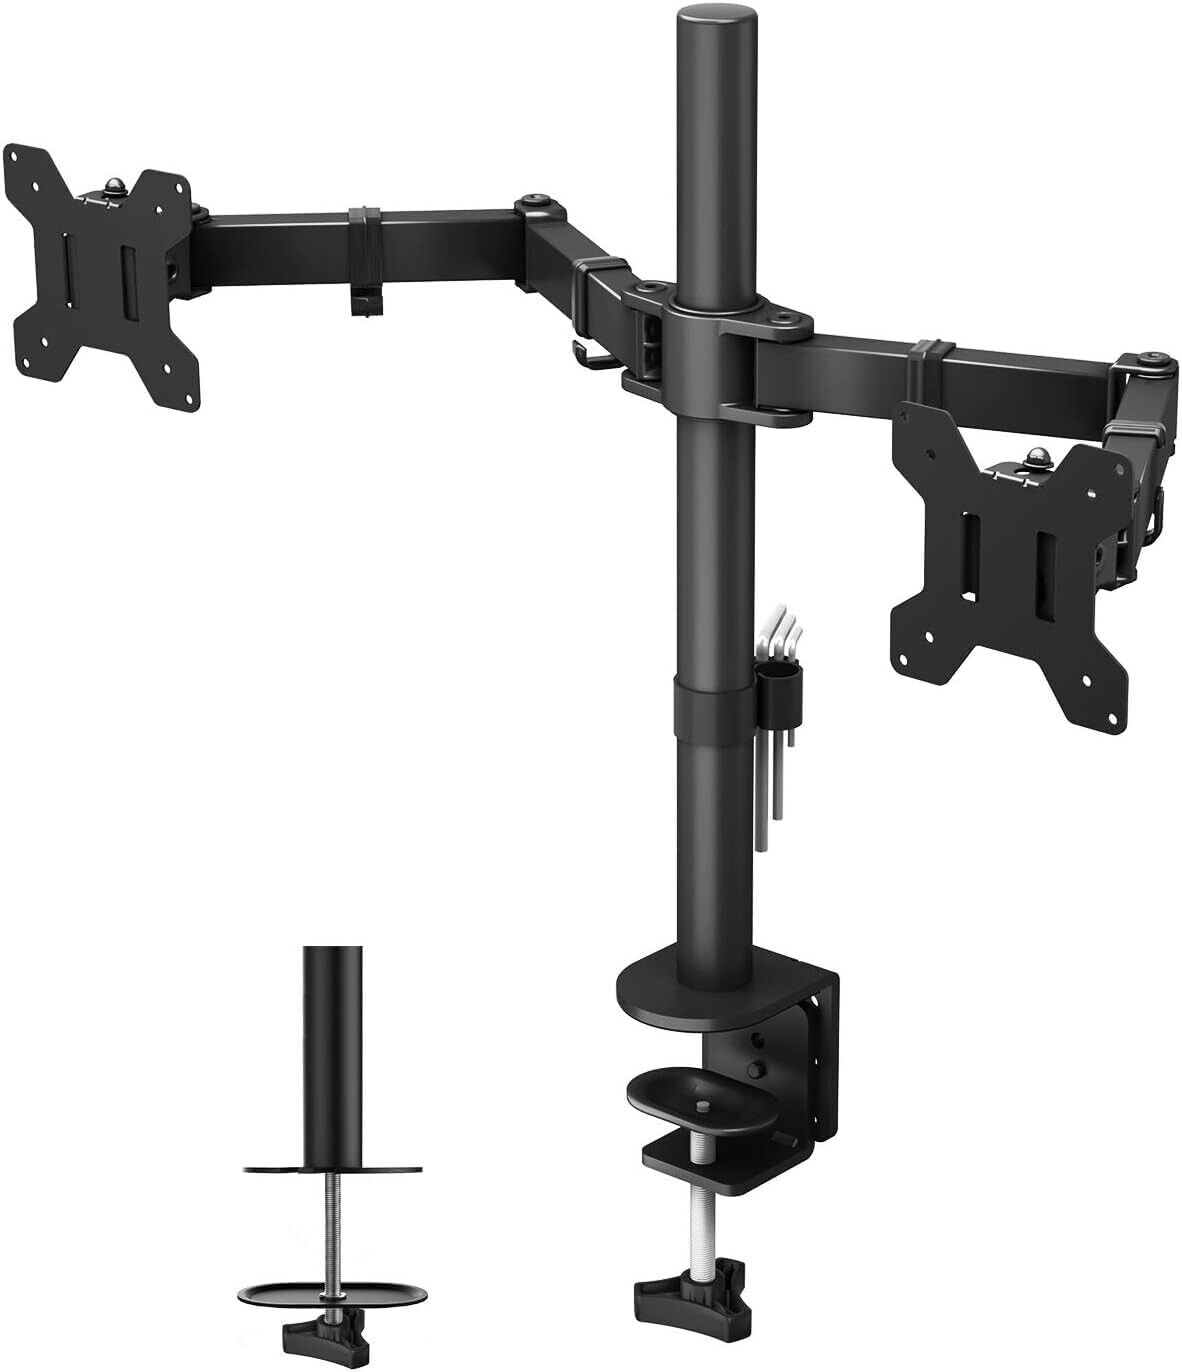 Bontec MDM002 Black LED/LCD Dual Monitor Arms Adjustable Stand 13 - 27 inch